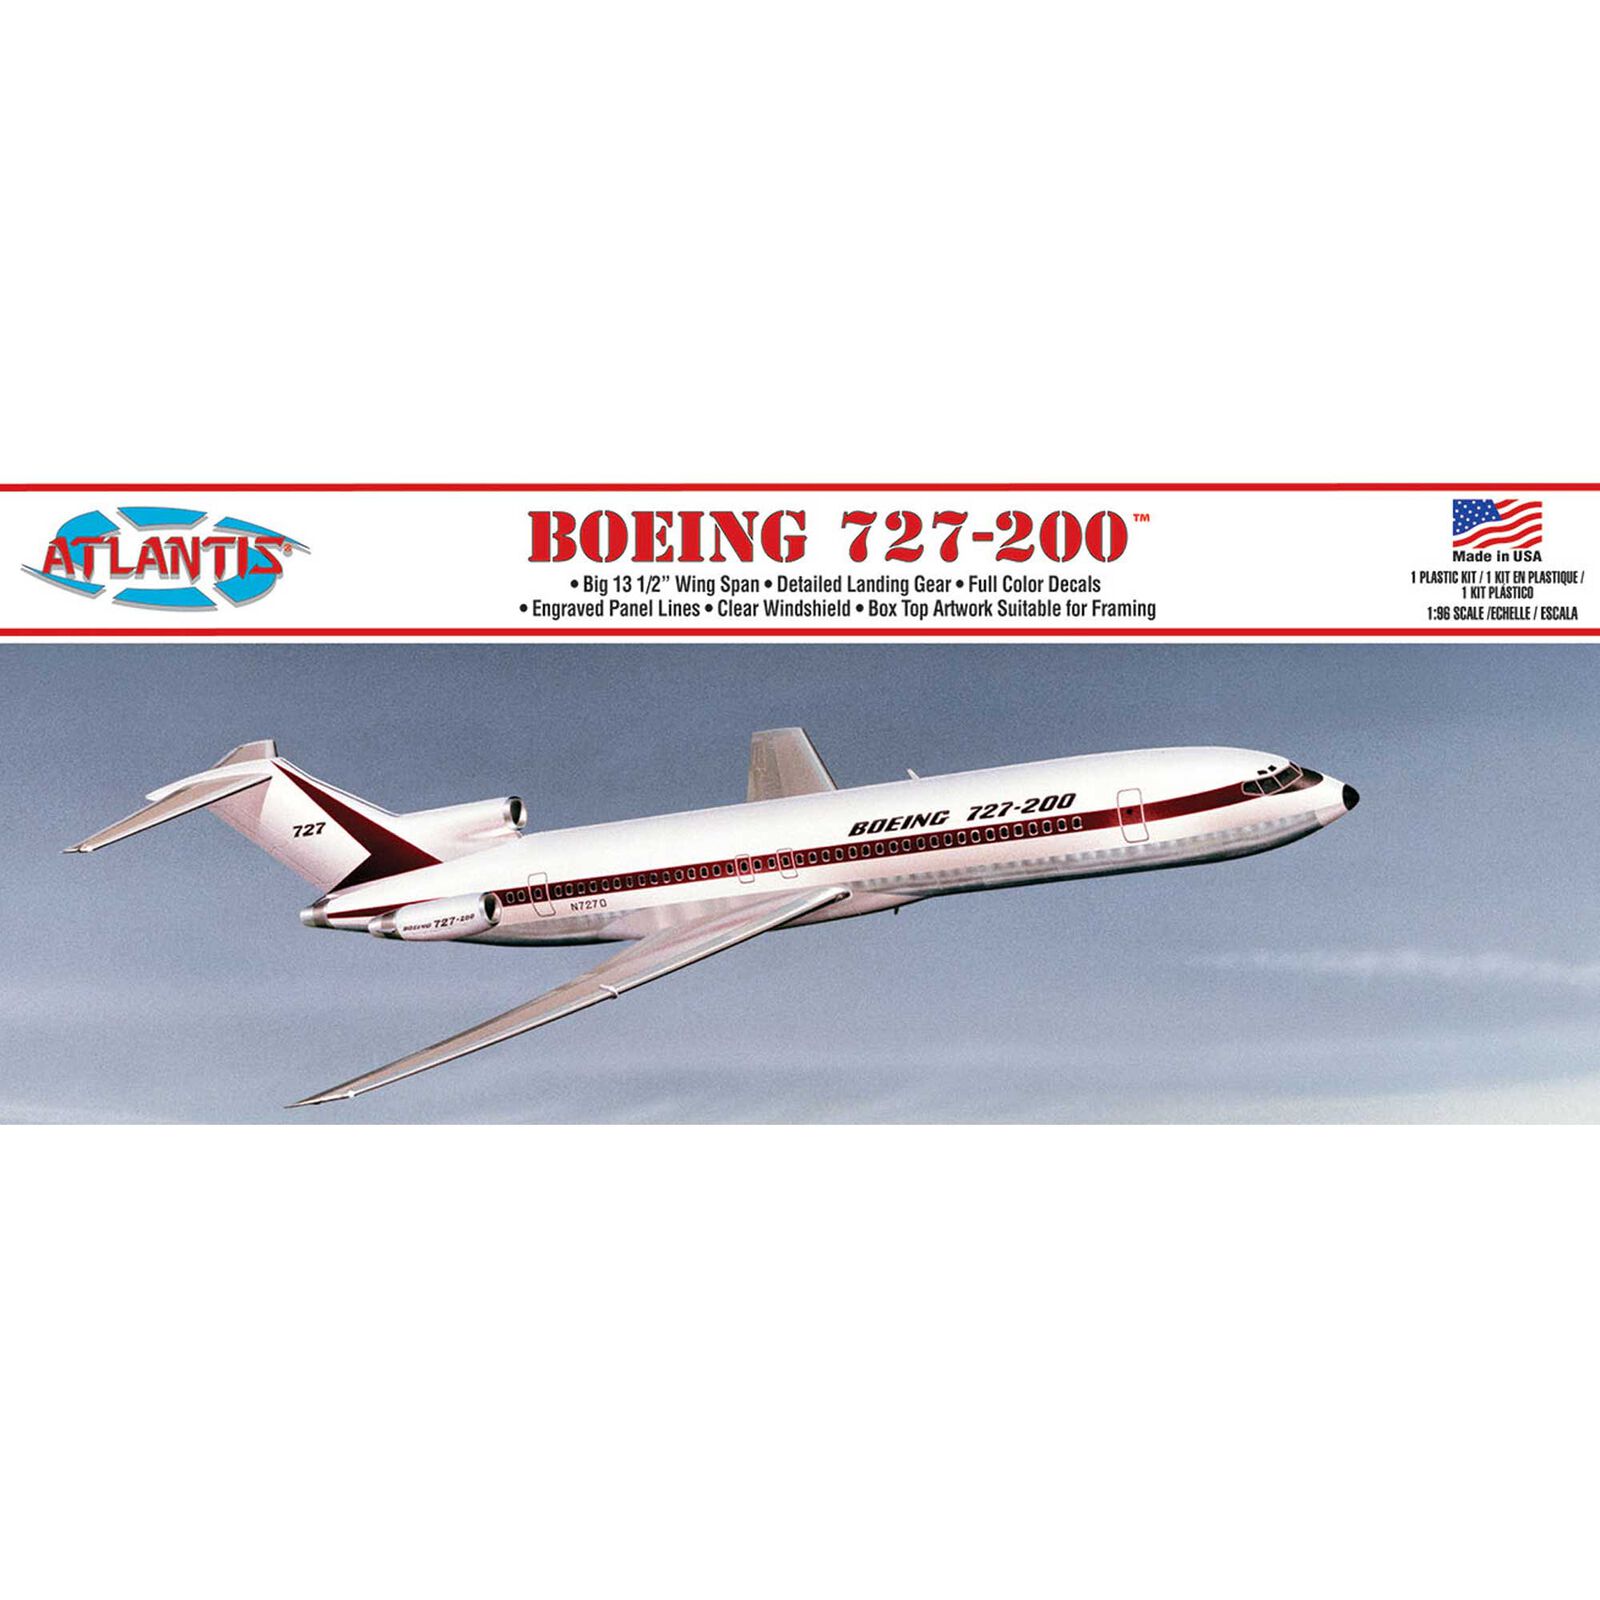 1/96 Boeing 727 Airliner with Boeing Markings